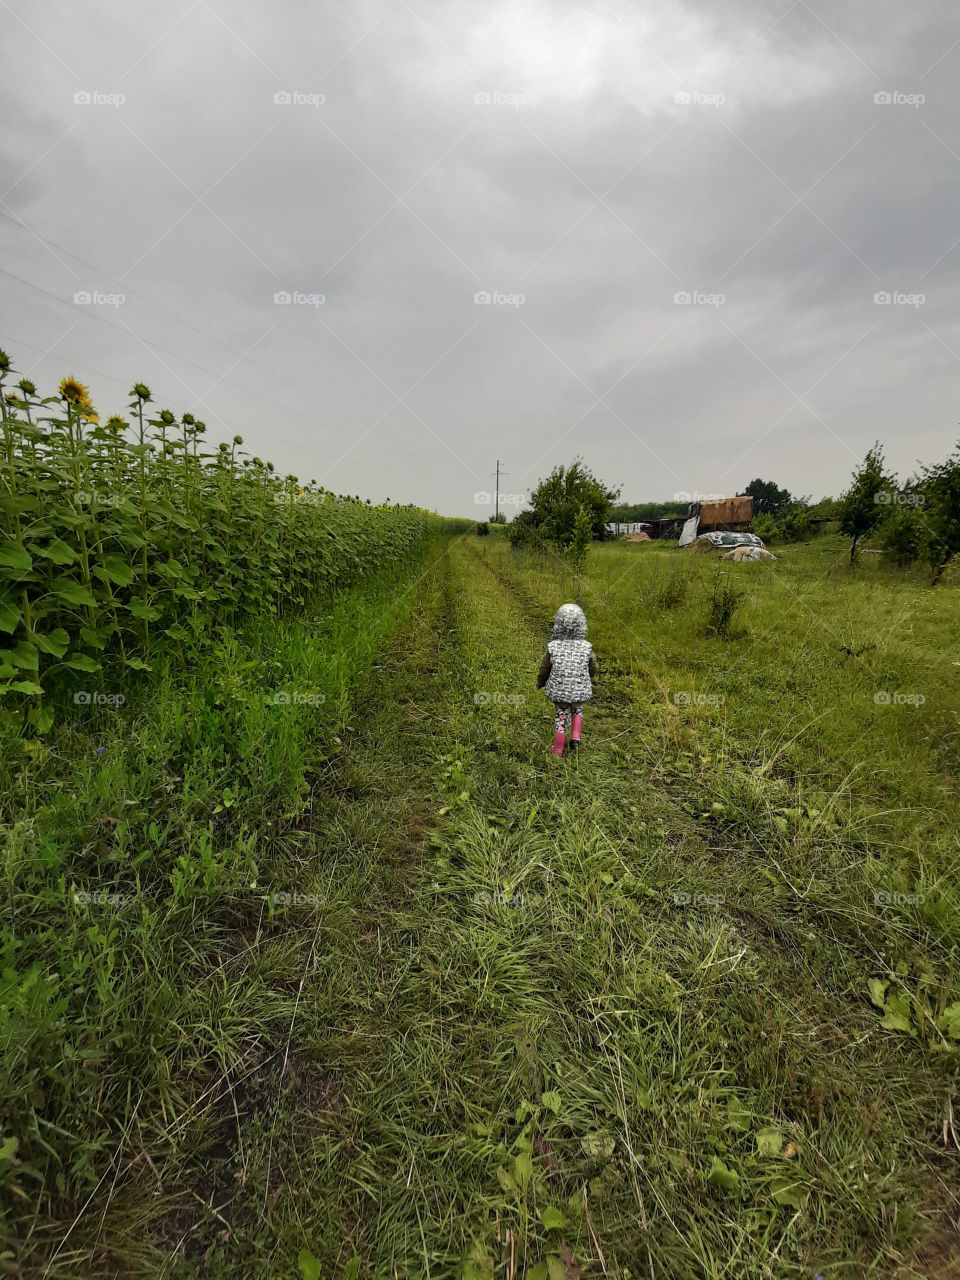 A child from the back runs along the field with sunflowers in cloudy weather